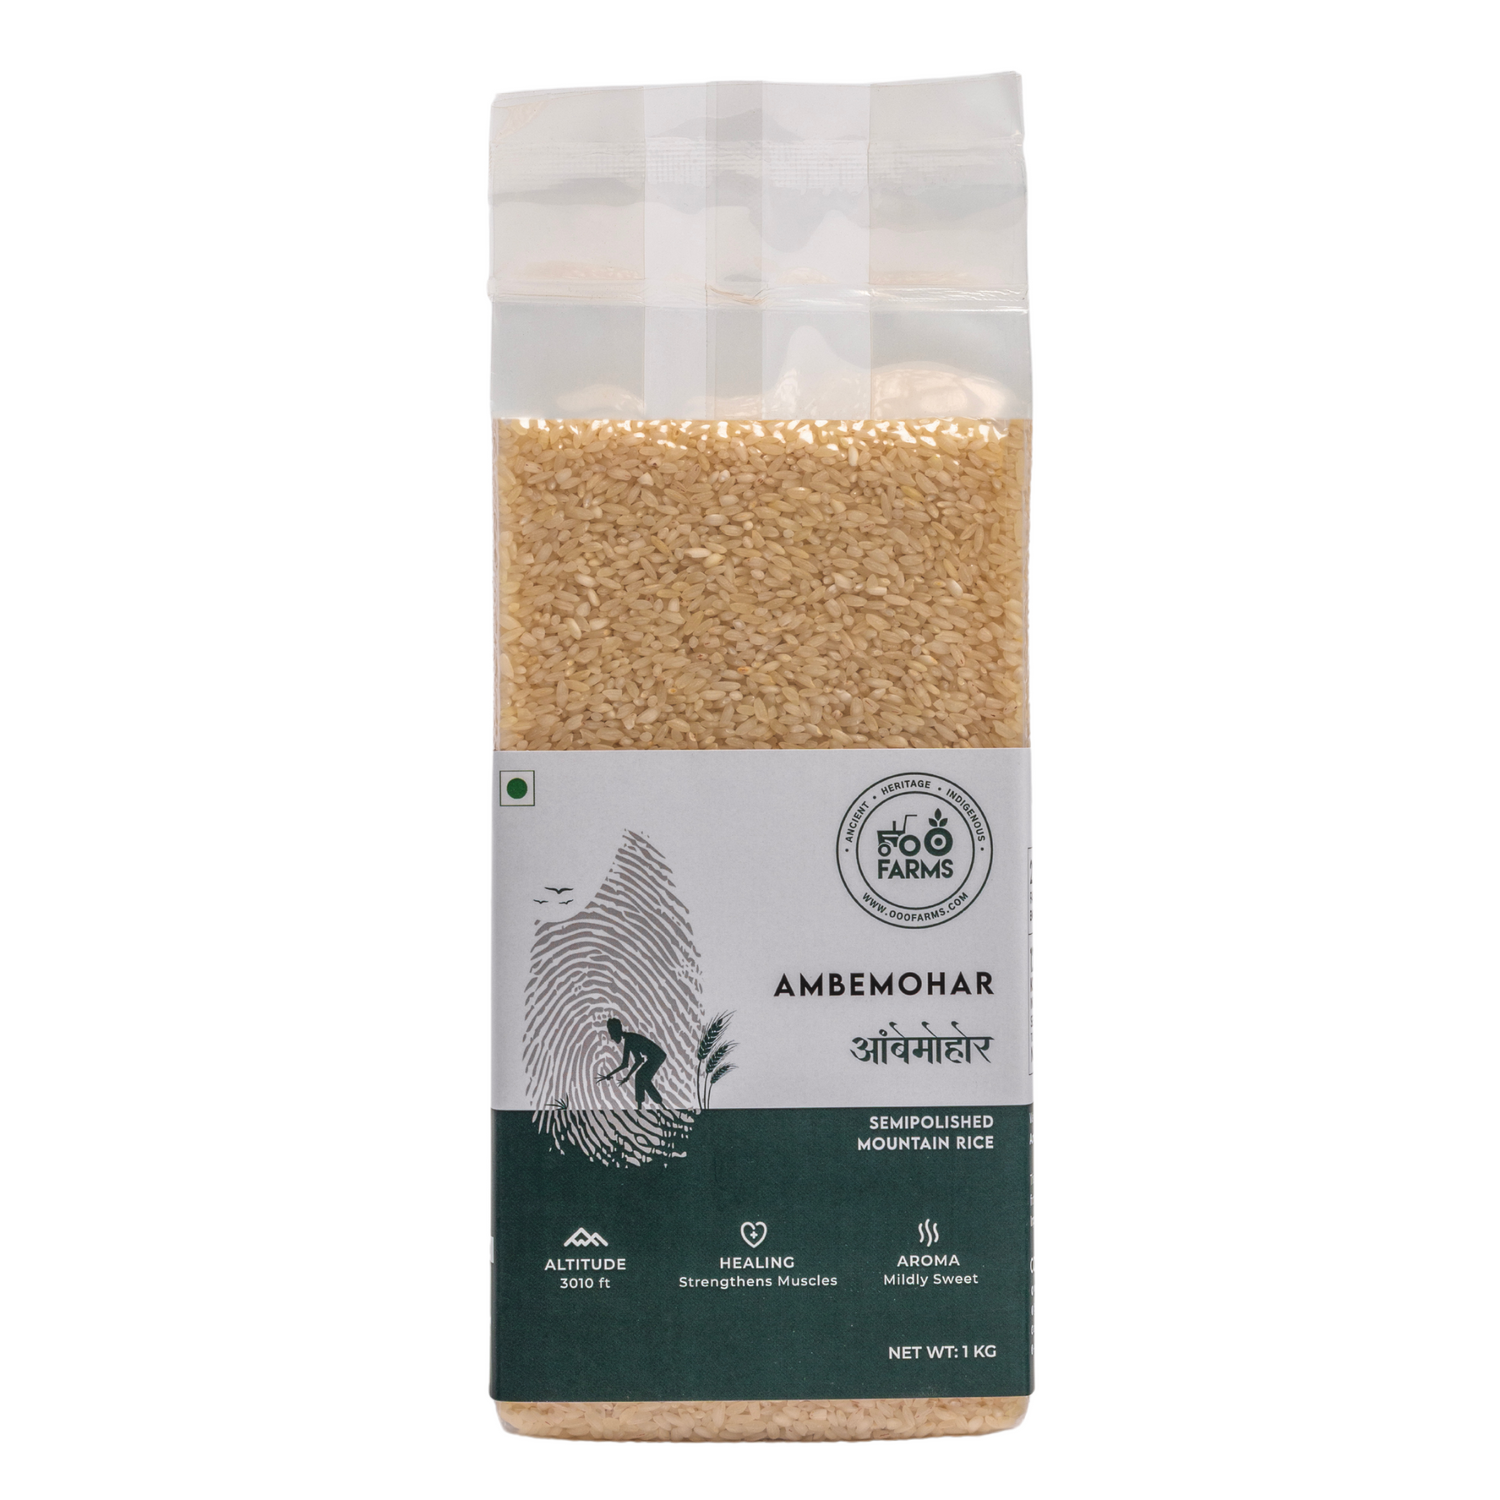 OOO Farms Ambemohar Rice (Semipolished) Package Frontside